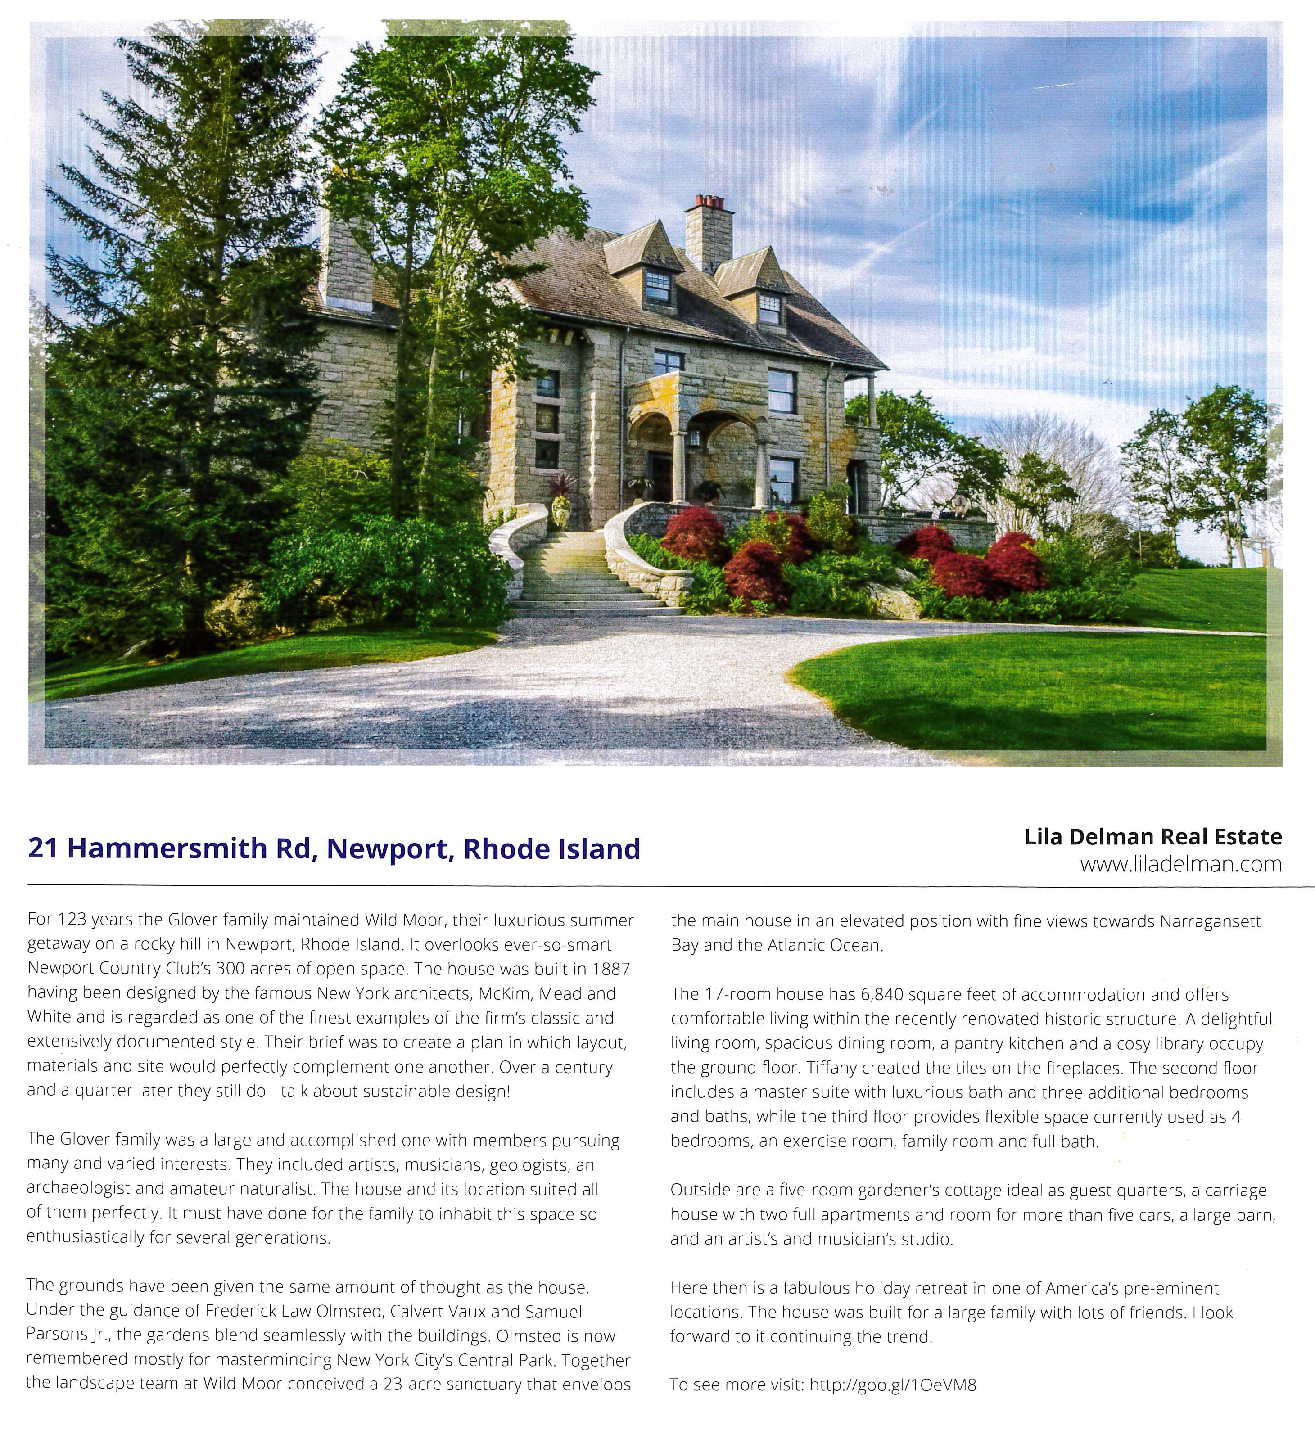 Lila Delman Property Featured in The Chairman’s Choice IV